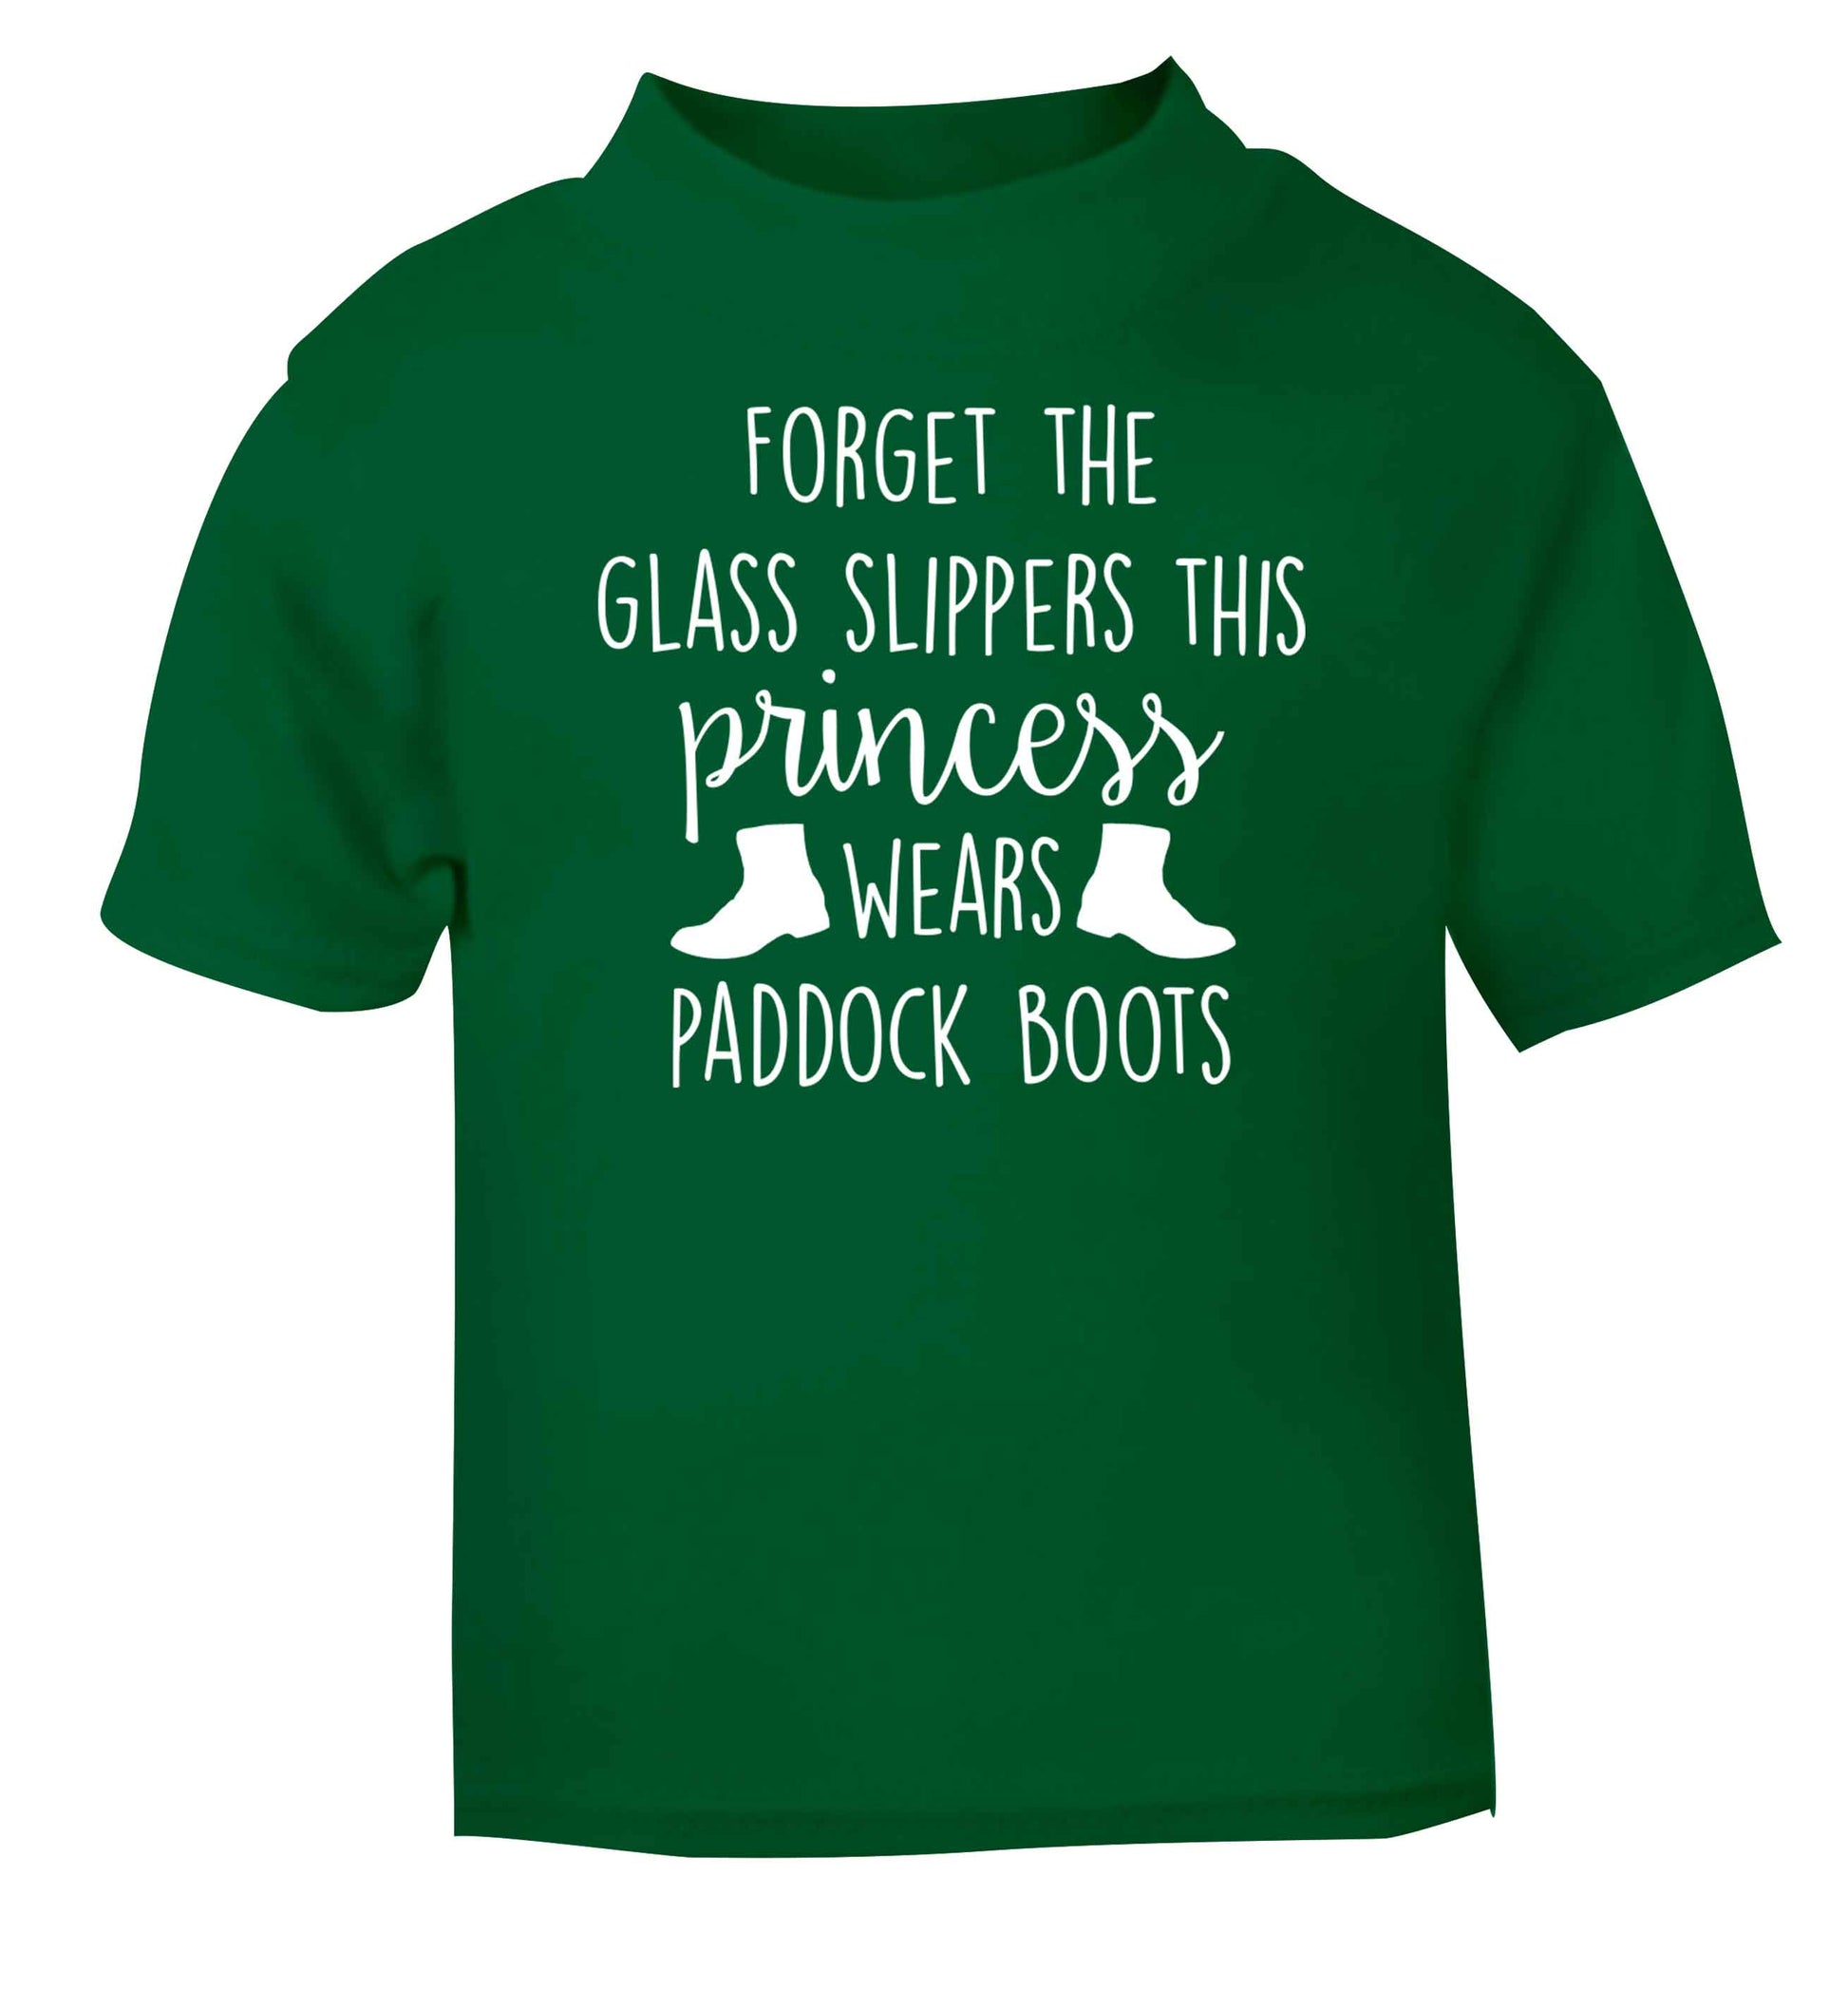 Forget the glass slippers this princess wears paddock boots green baby toddler Tshirt 2 Years